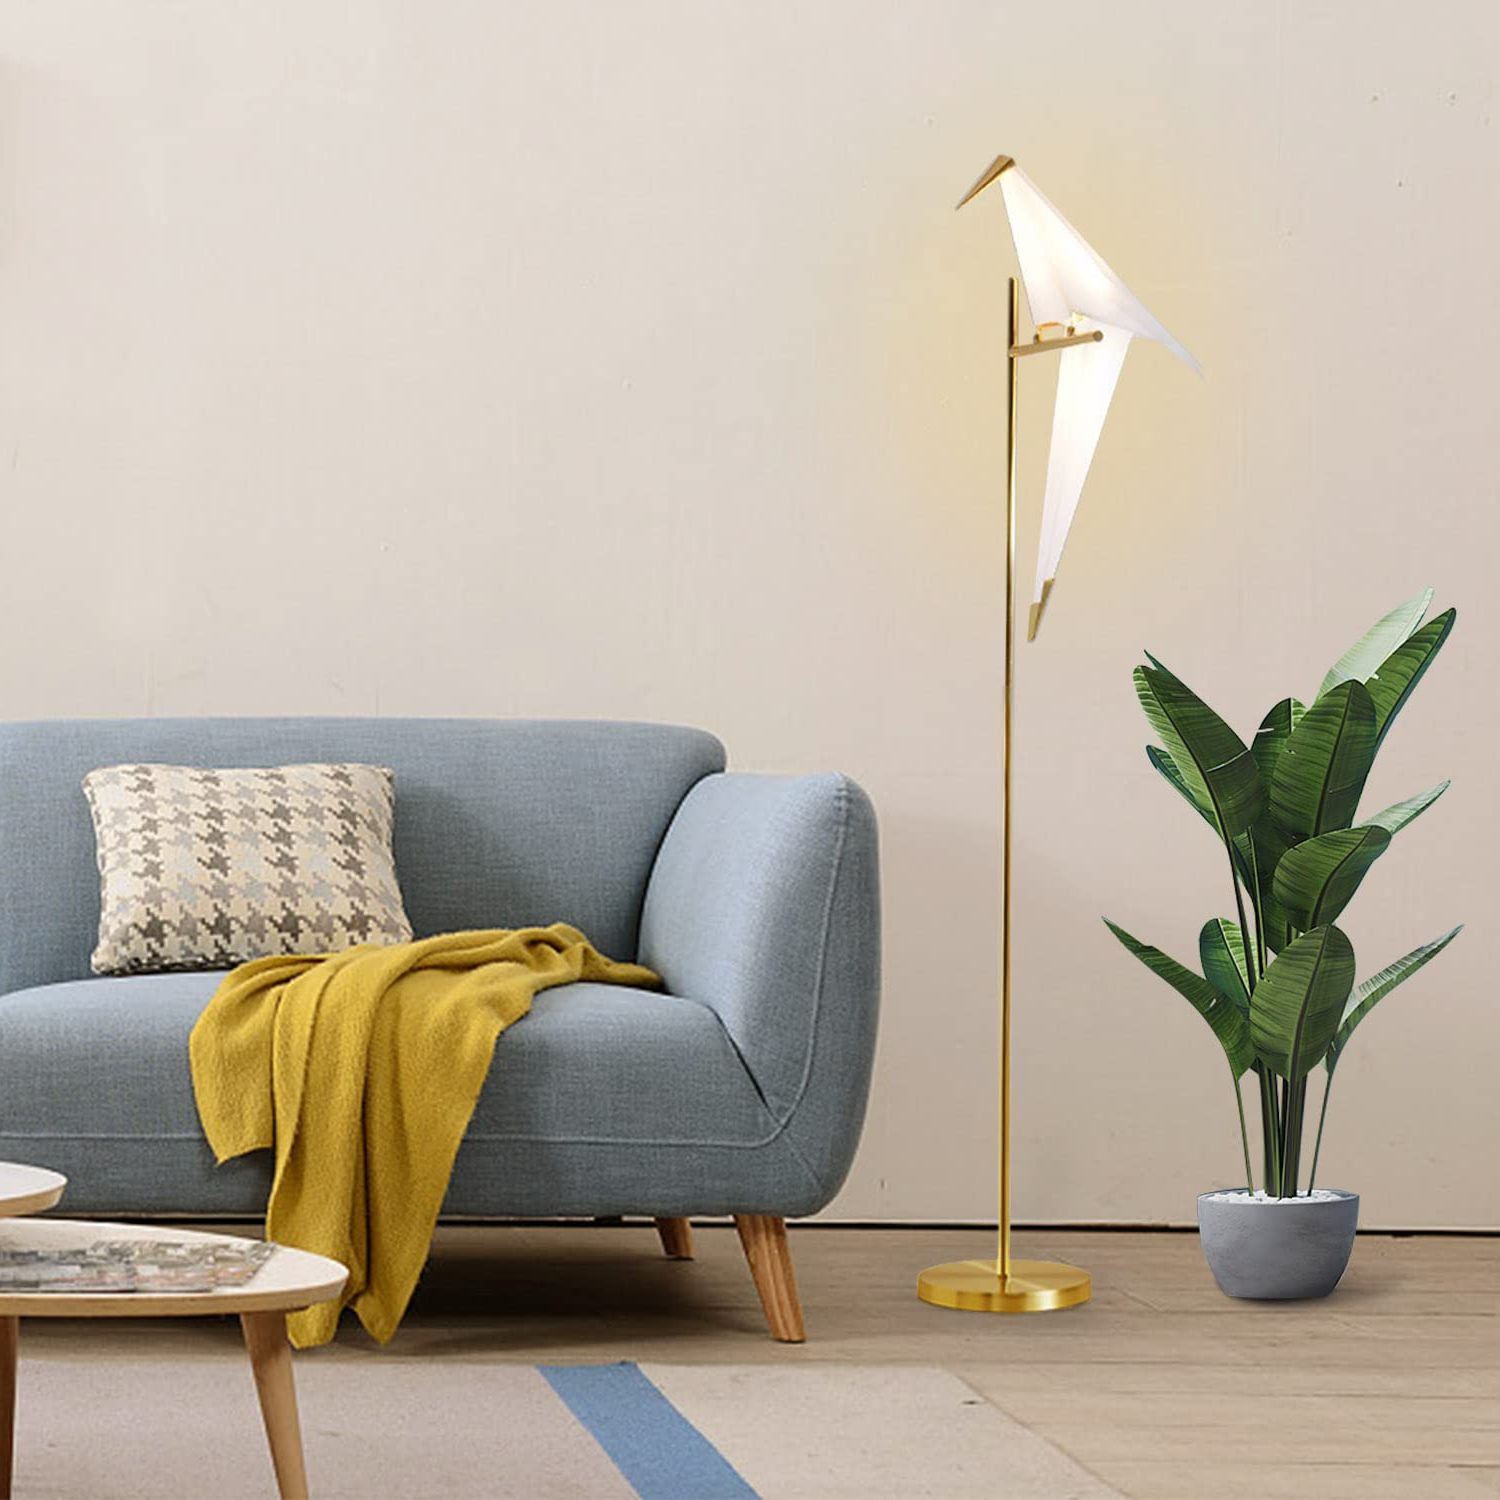 Popular 62 Inch Standing Lamps In More Change Morechange 62 Inch Modern Led Floor Lamp For Living Room ,  Modern Gold Standing Lamp (View 3 of 10)